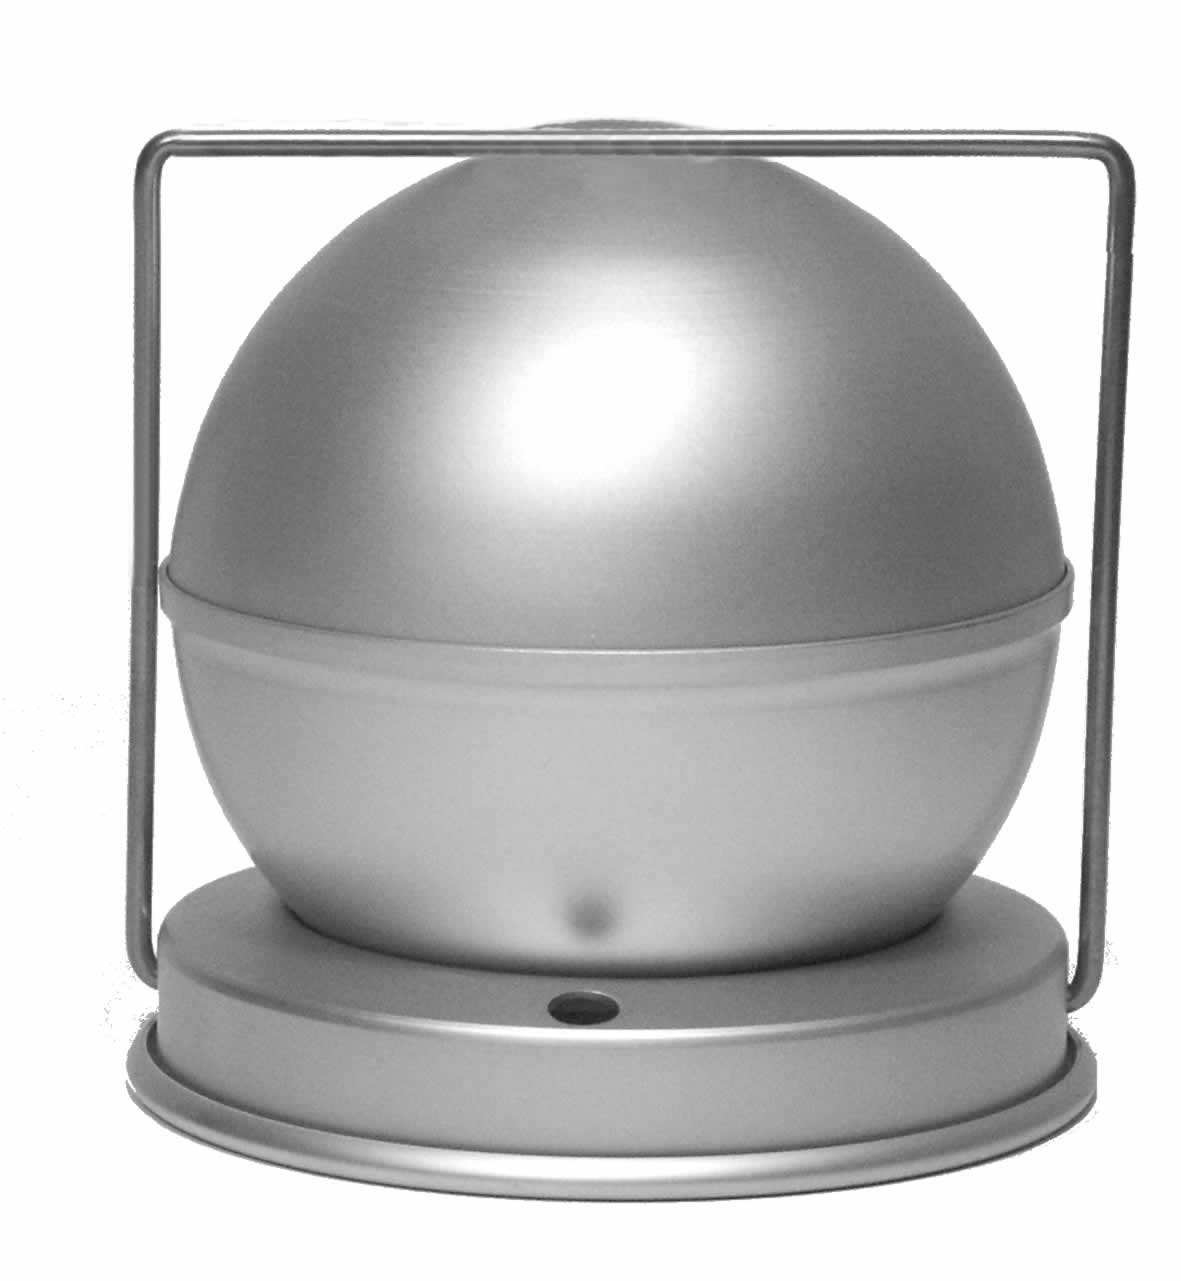 SILVERWOOD 5in Spherical pudding mould